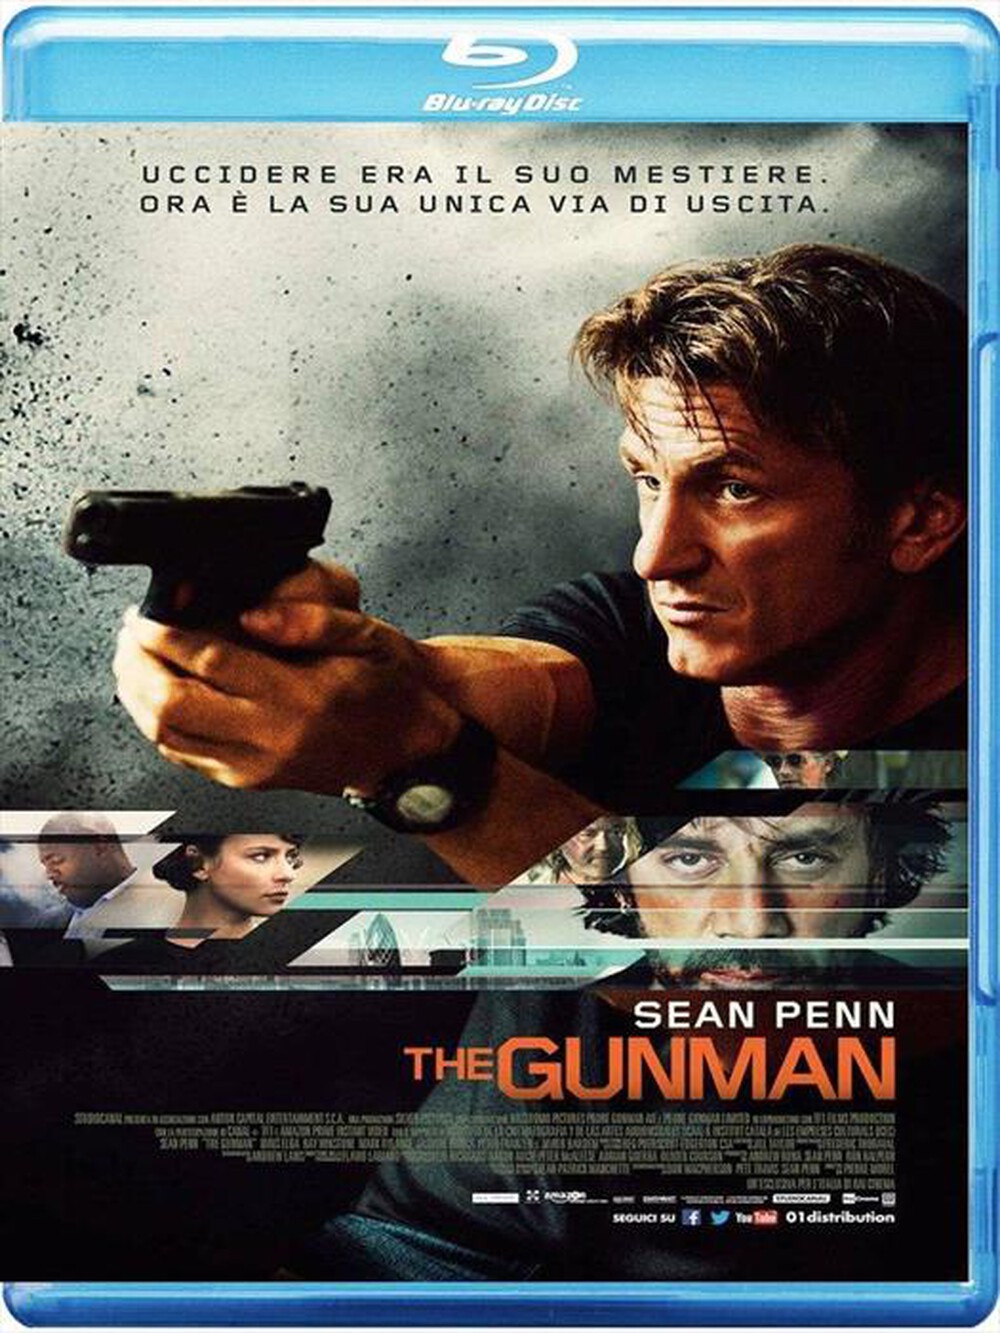 "EAGLE PICTURES - Gunman (The)"